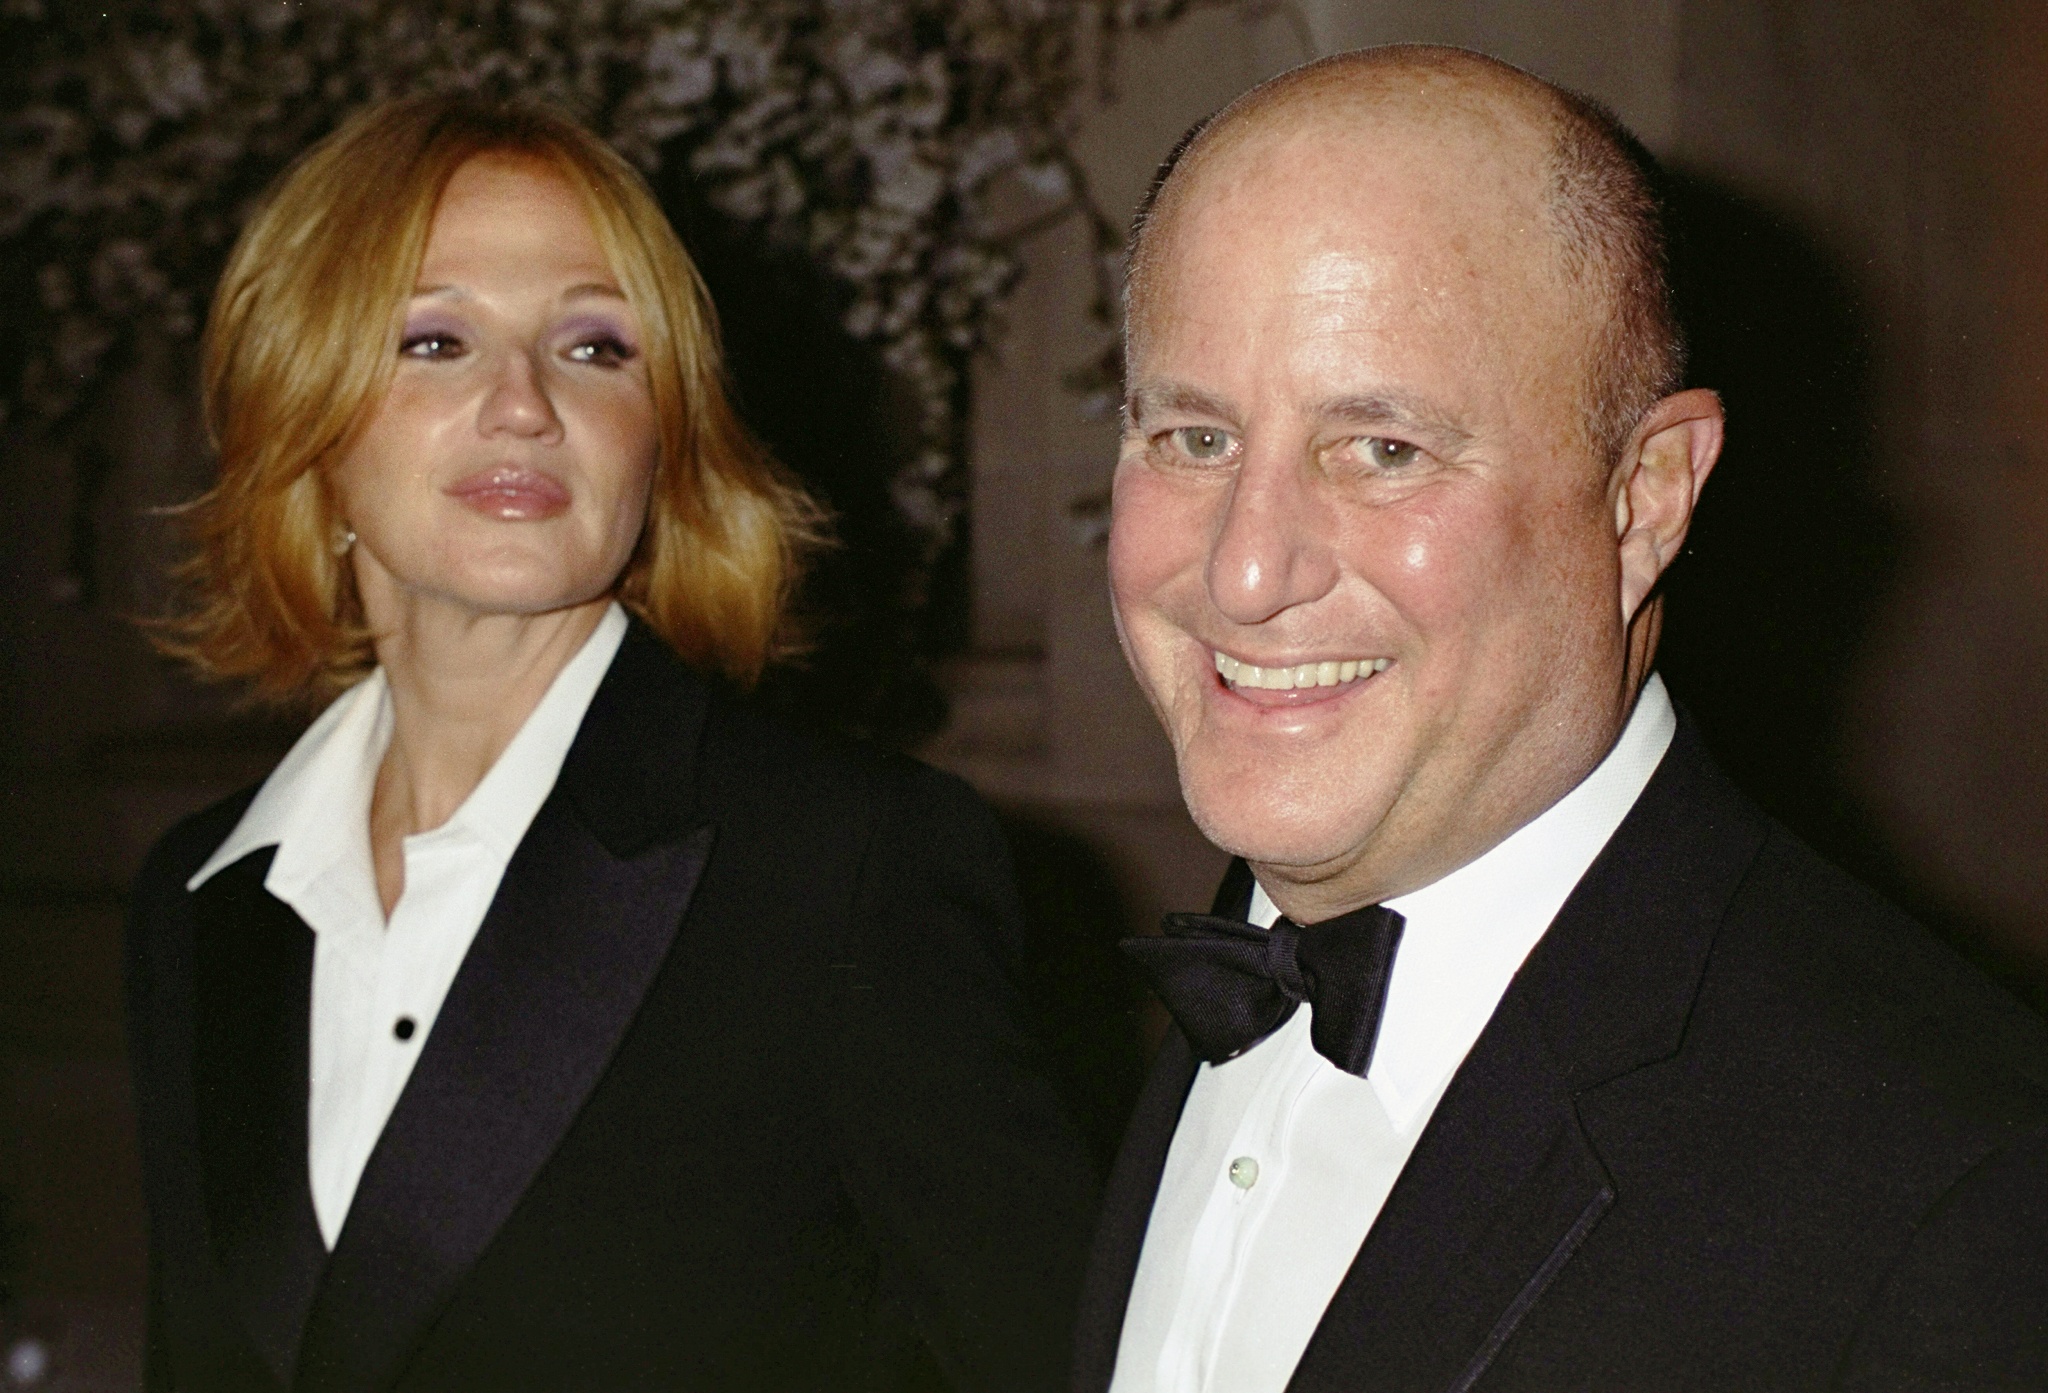 Ron Perelman and Ellen Barkin at the Metropolitan Museum of Art for the opening of "Jacqueline Kennedy: The White House Years, Selections from the John F. Kennedy Library and Museum." | Source: Getty Images